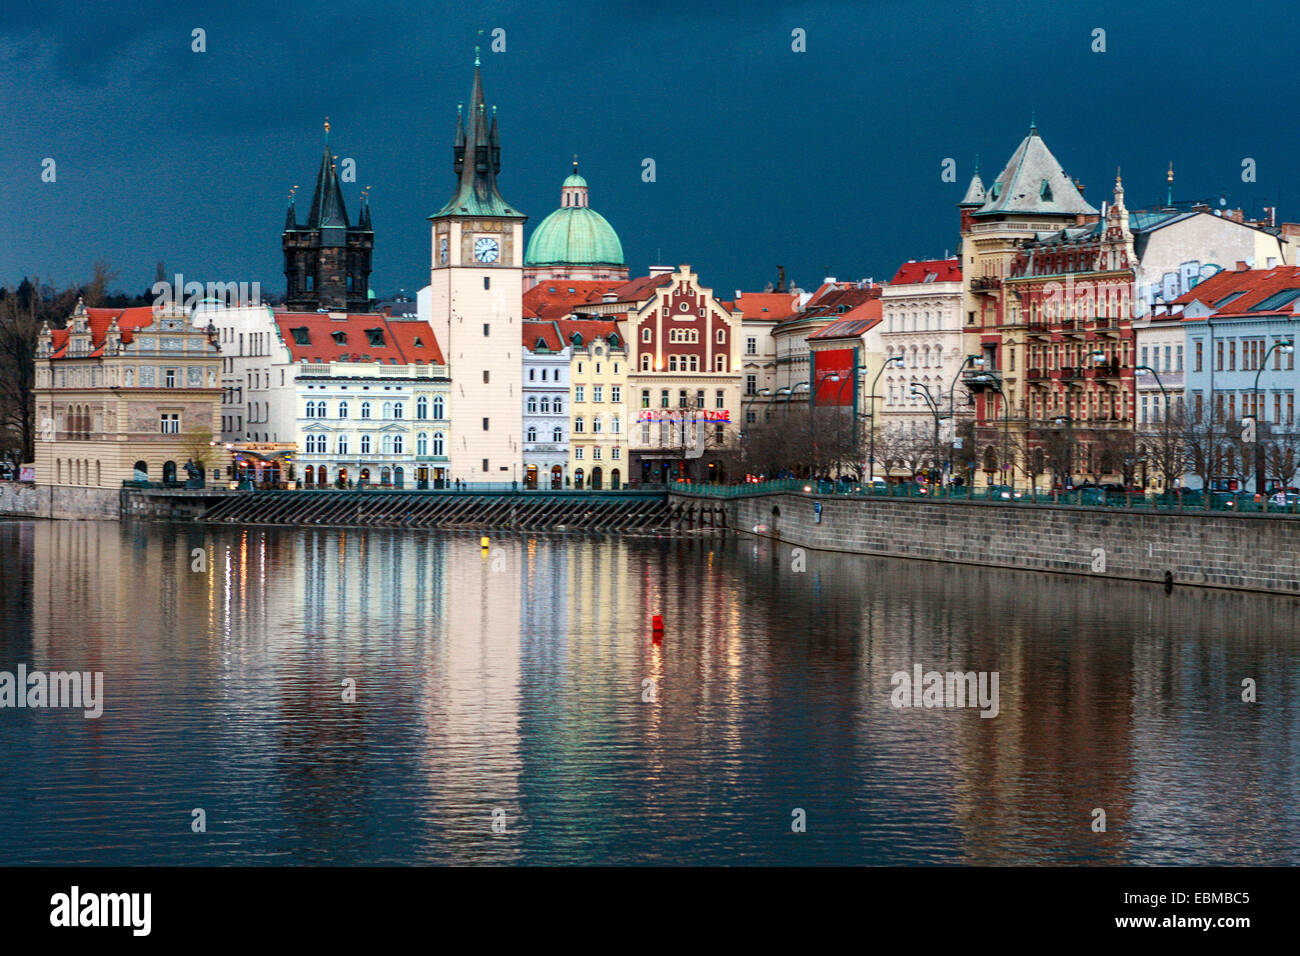 Vltava river, Smetana Museum in the former waterworks, the Old Town Bridge Tower, Water tower, dome of the Cross Church, Prague Stock Photo